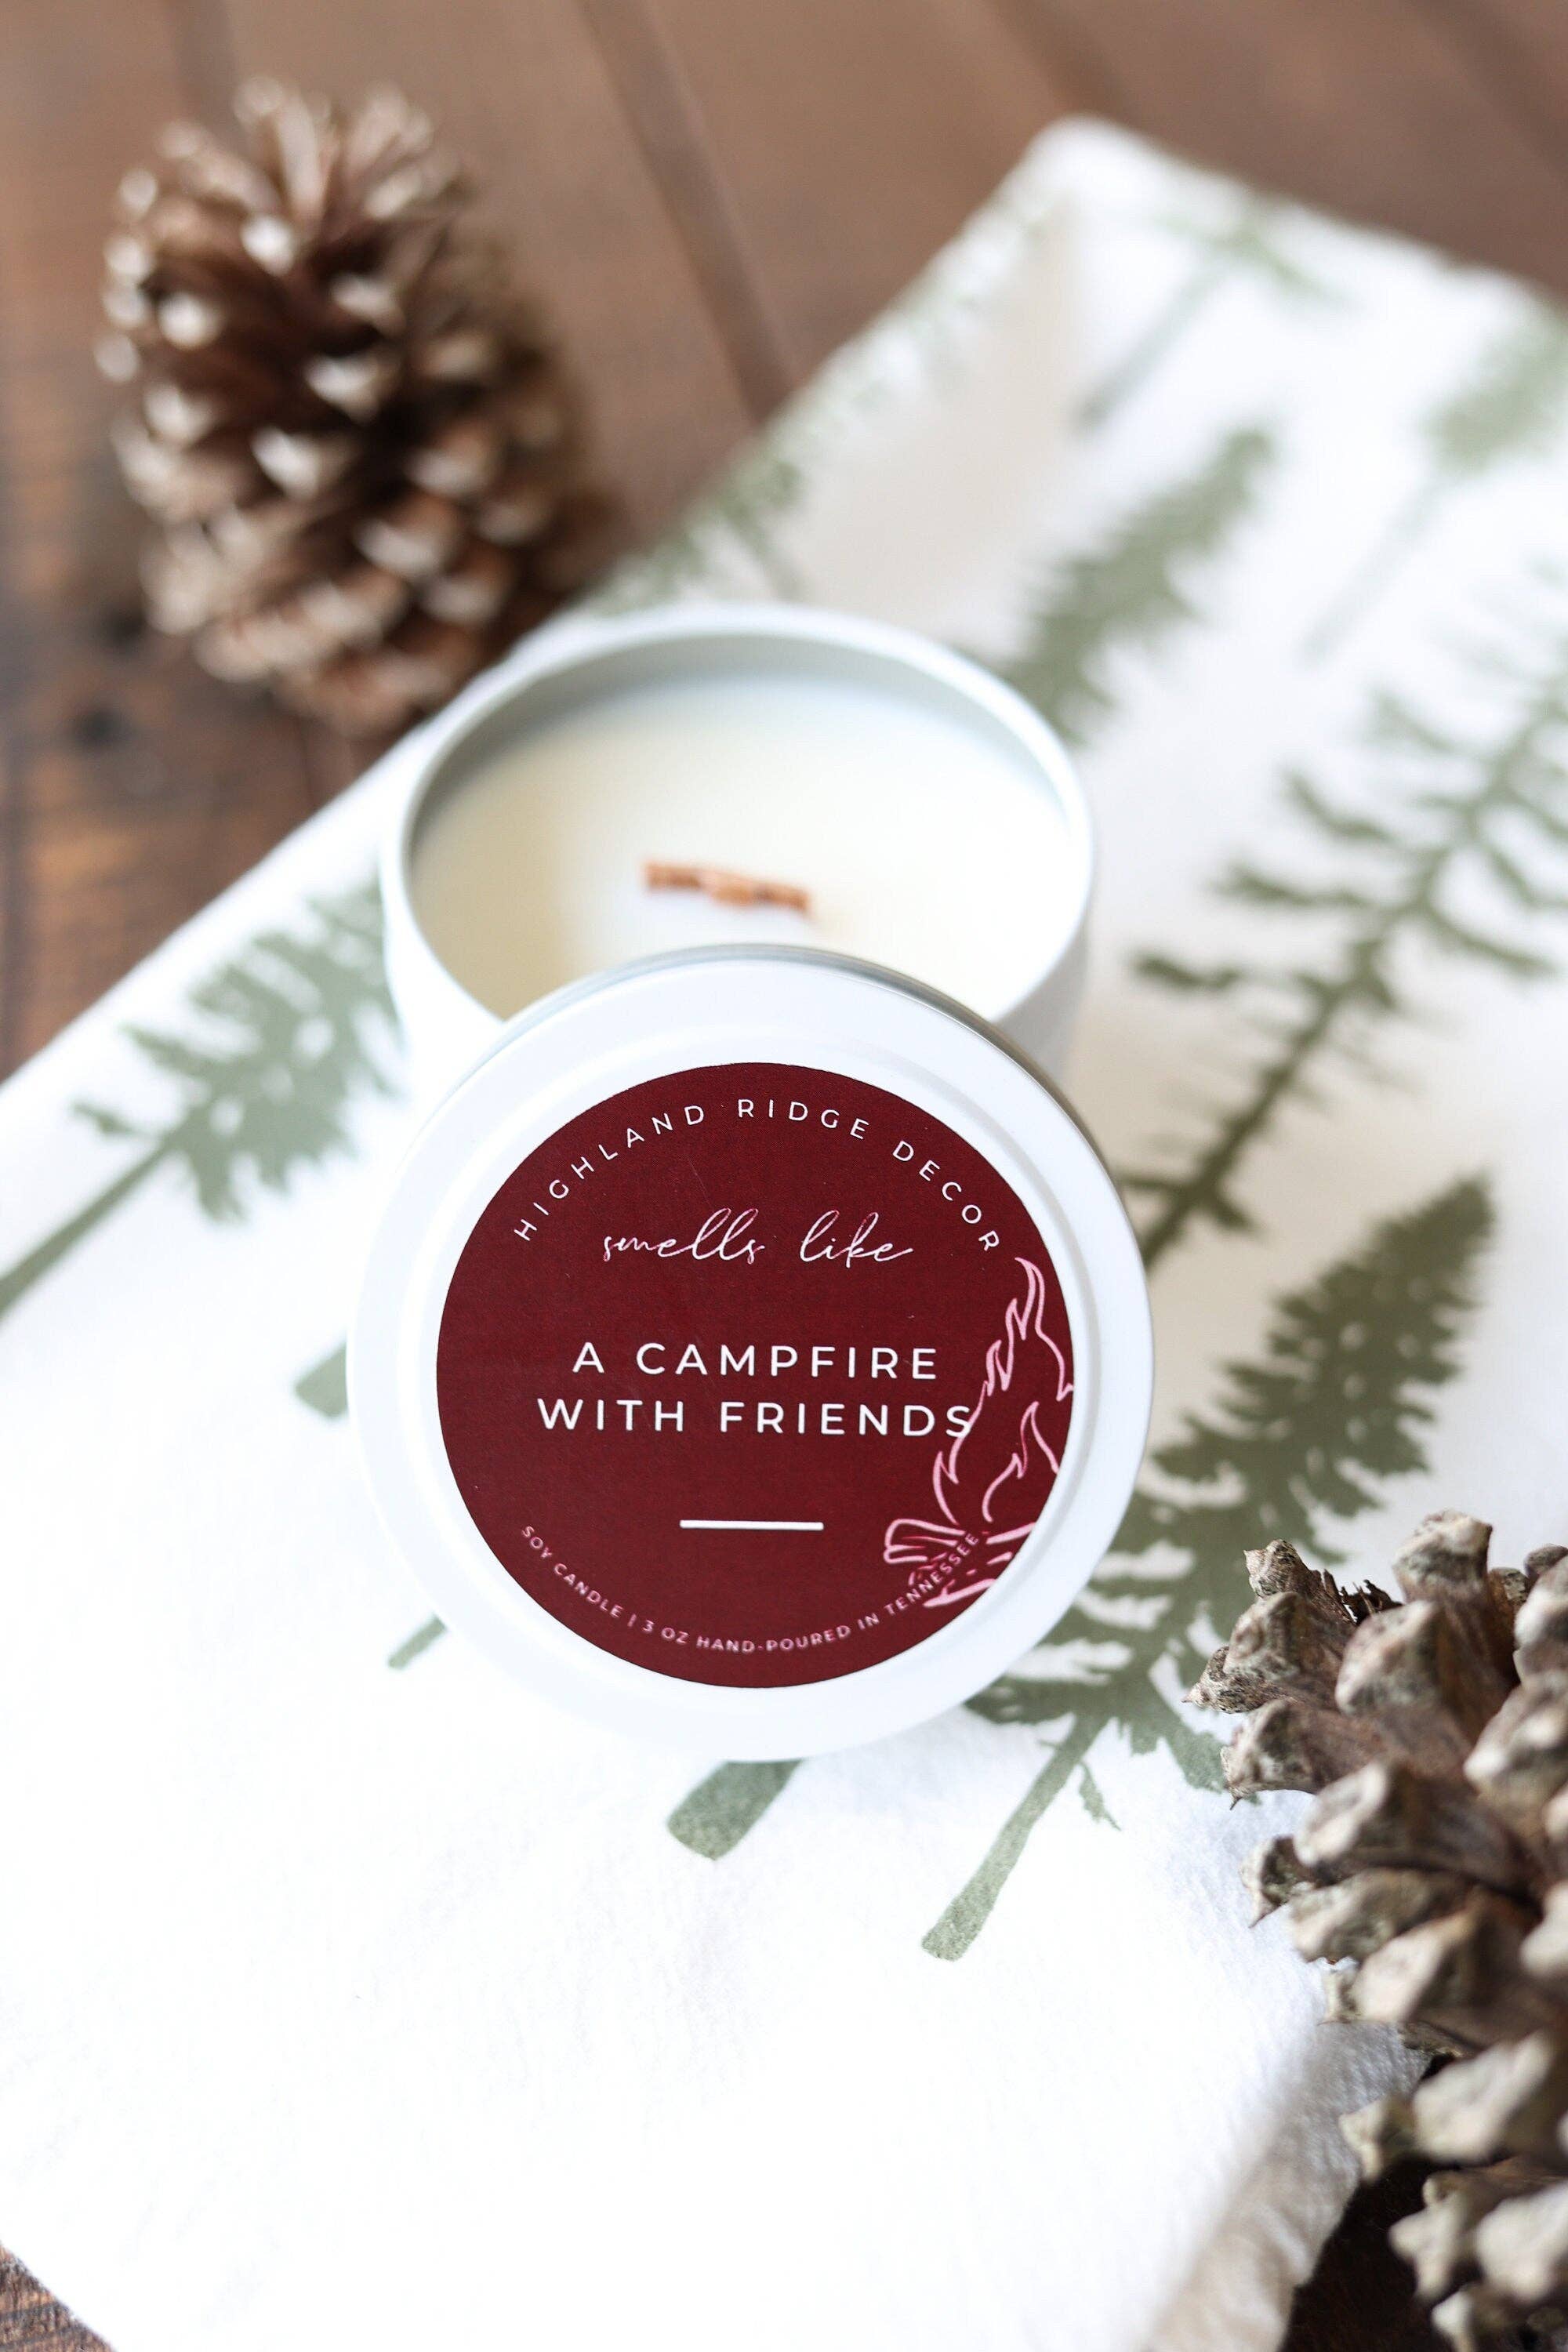 "A Campfire With Friends" Candle Tin